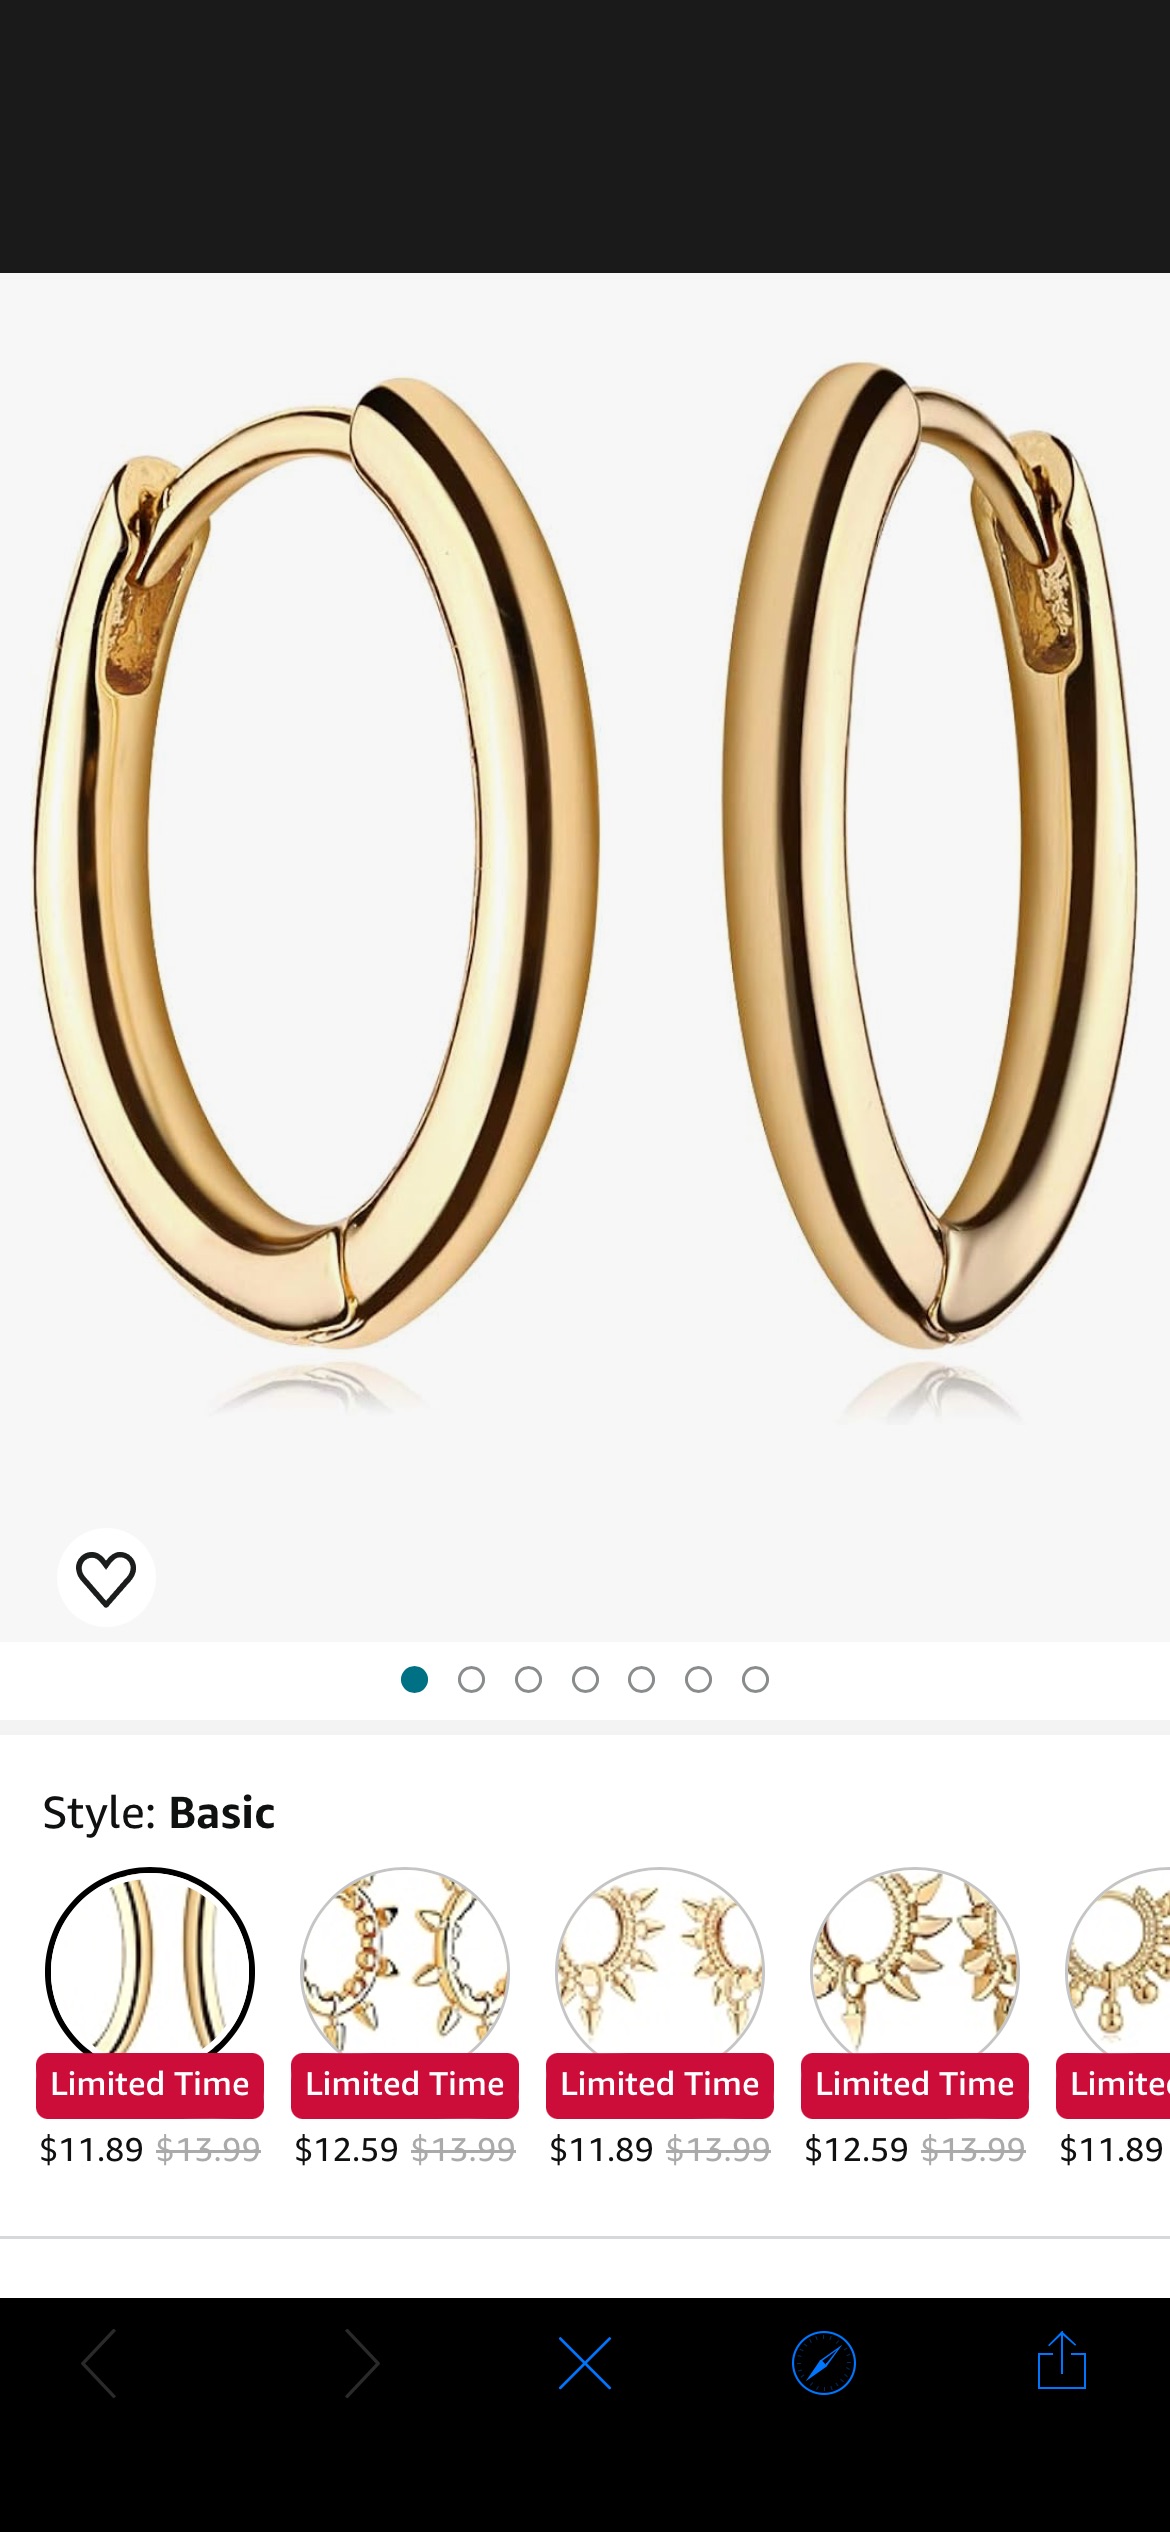 Amazon.com: MYEARS Women Basic Earrings Gold Huggie Hoop 14K Gold Filled Small Simple Handmade Hypoallergenic Everyday Jewelry: Clothing, Shoes & Jewelry